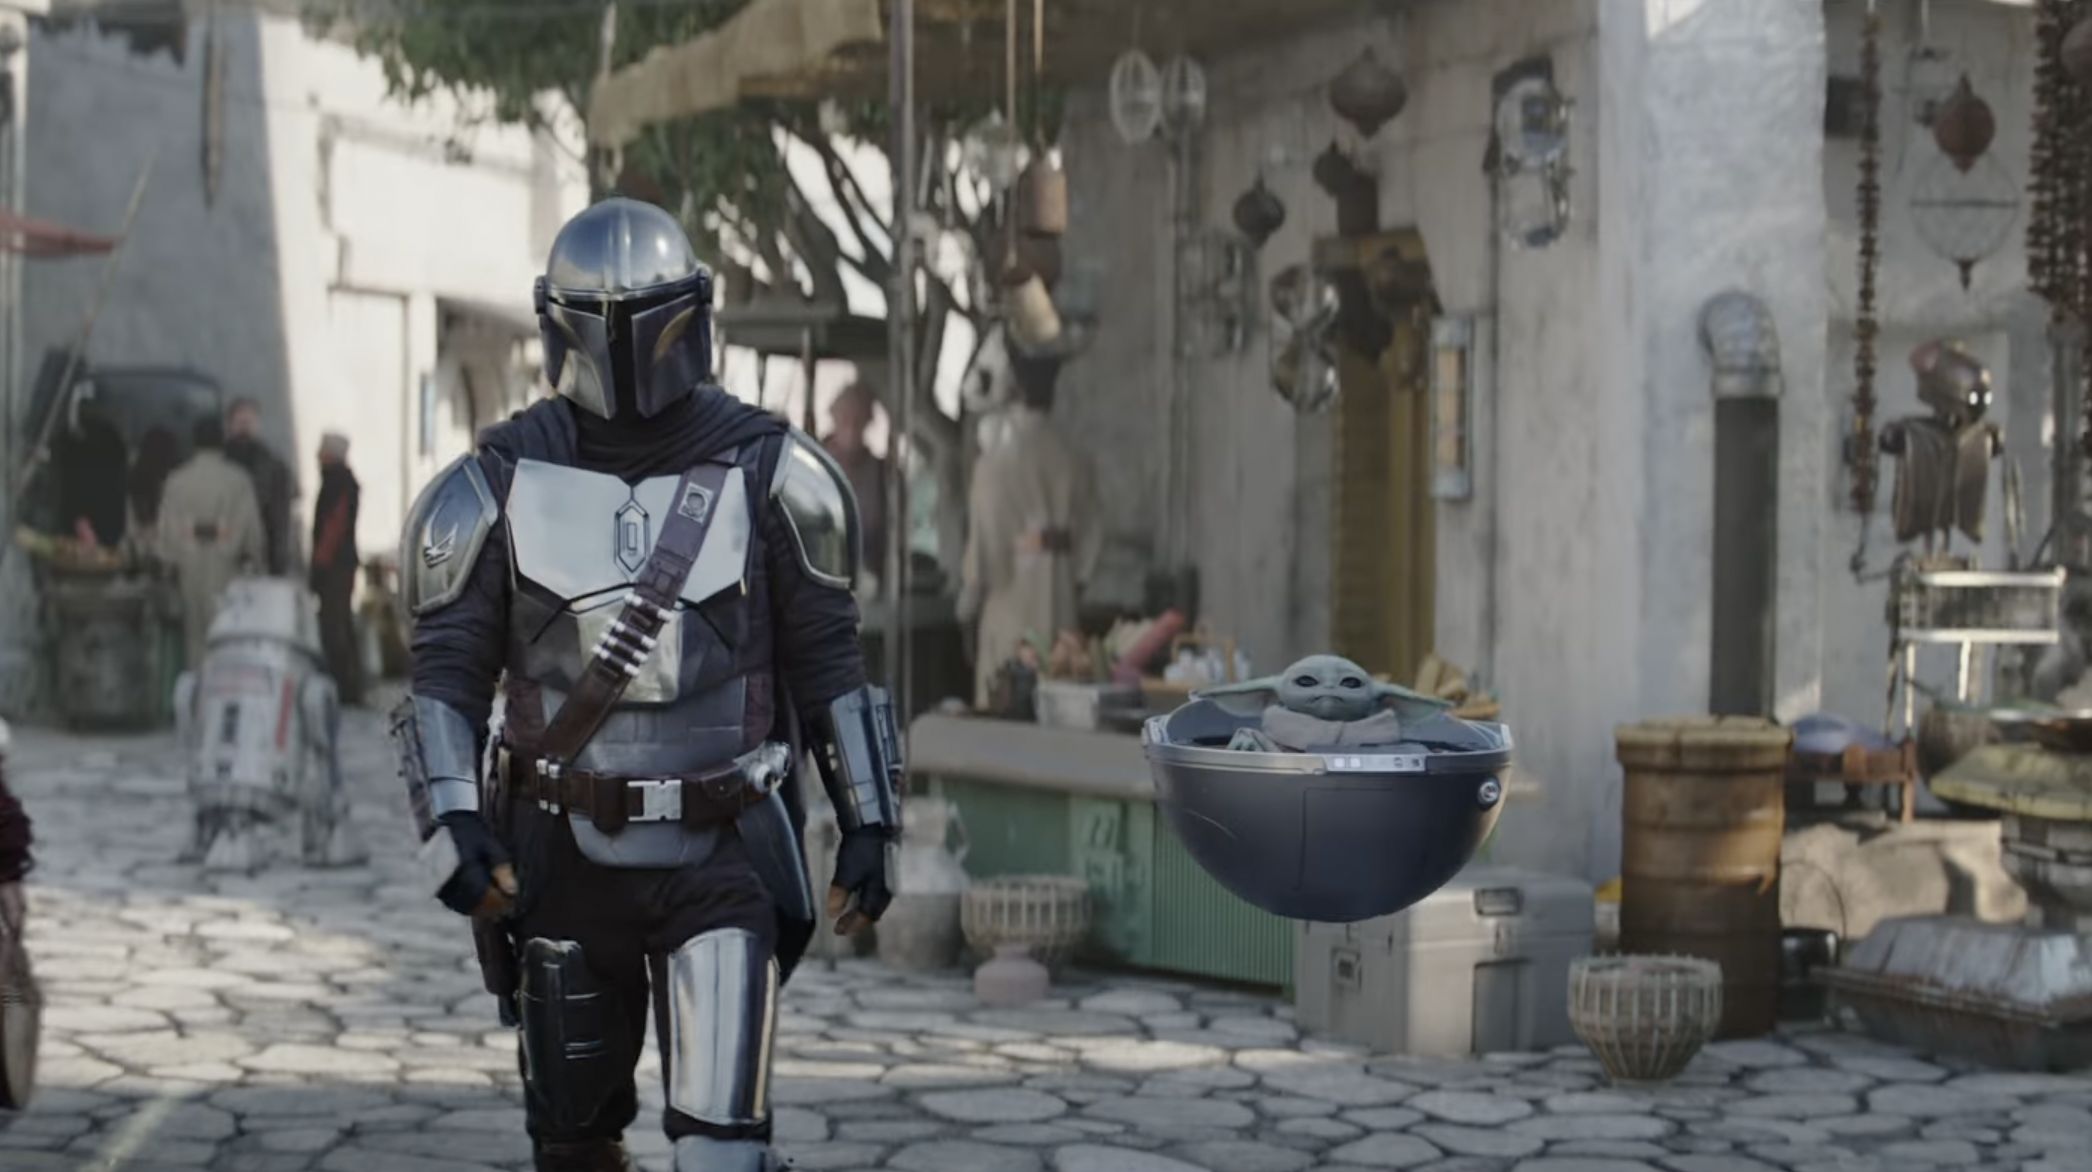 A scene from the mandalorian